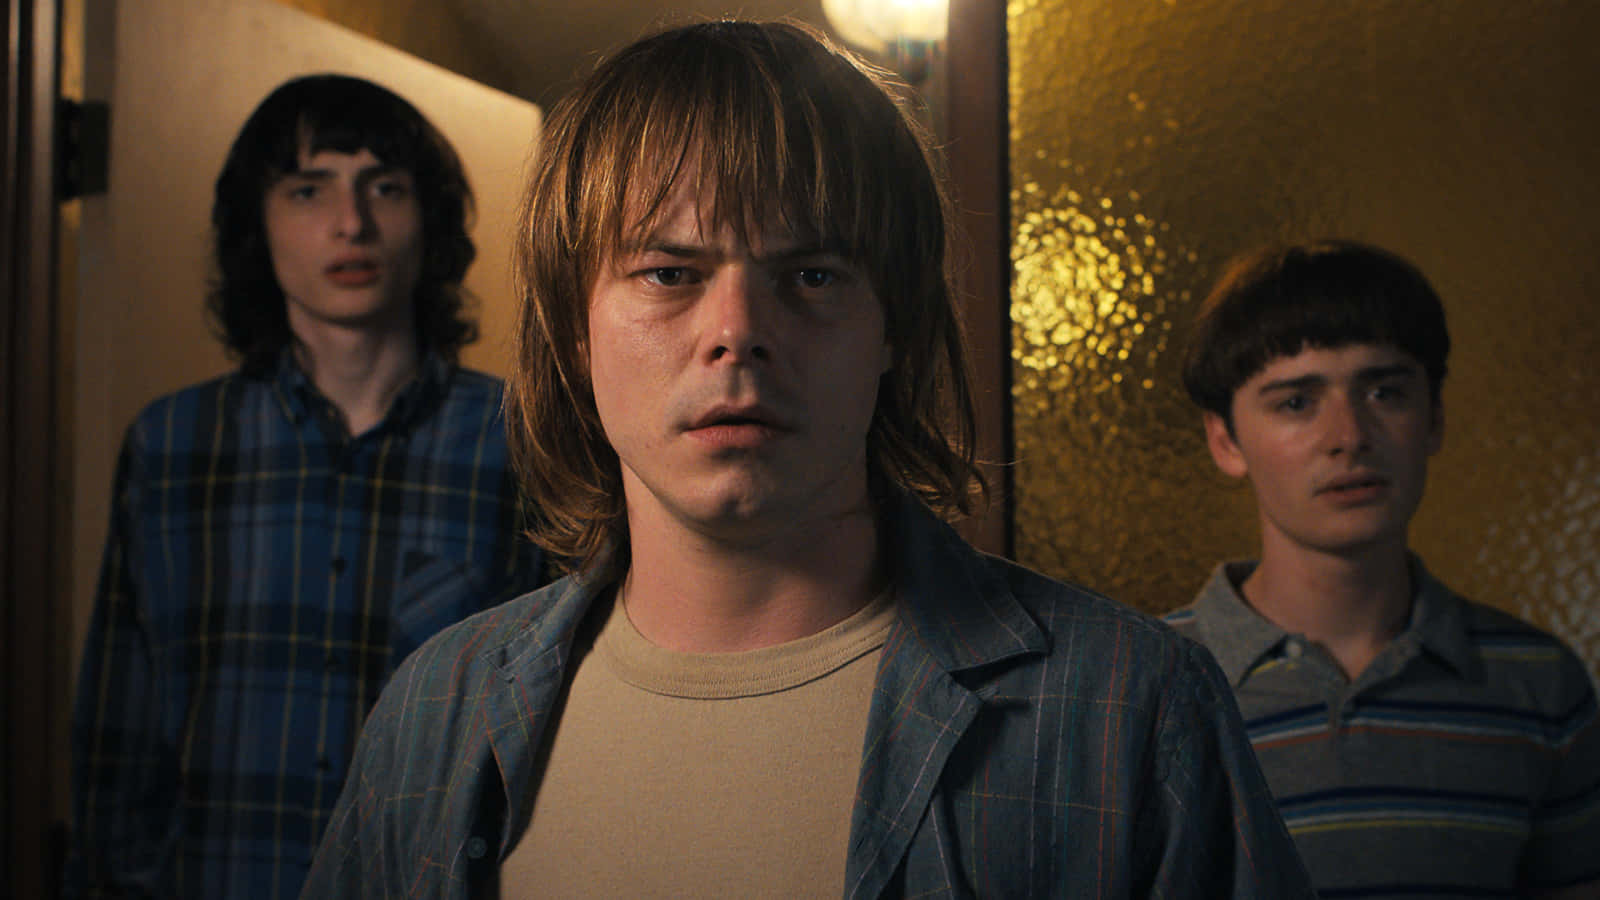 Mike,jonathan E Will Byers In Un'immagine Di Stranger Things Stagione 4.